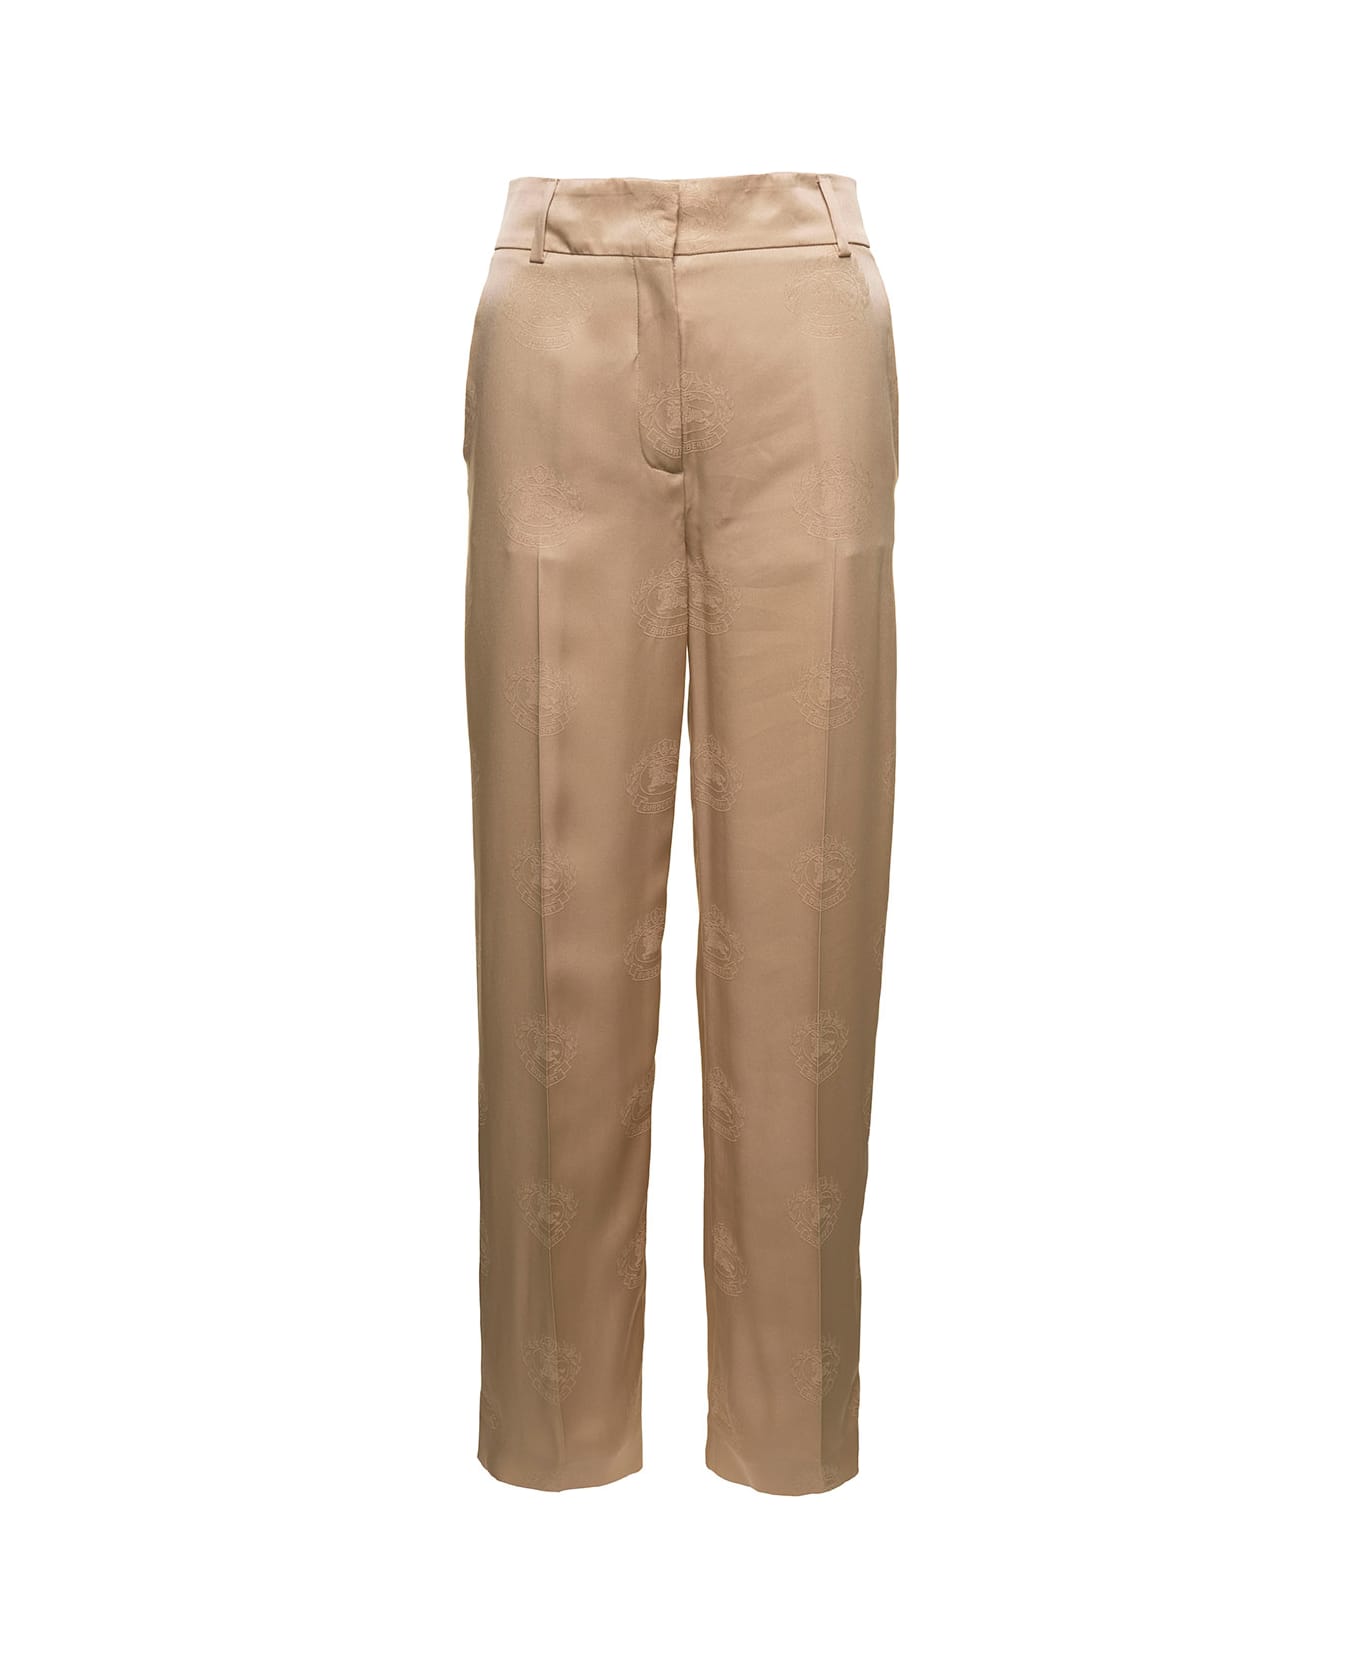 Burberry 'jane' Beige High-waisted Relaxed Pants In Silk Woman - Soft fawn ボトムス